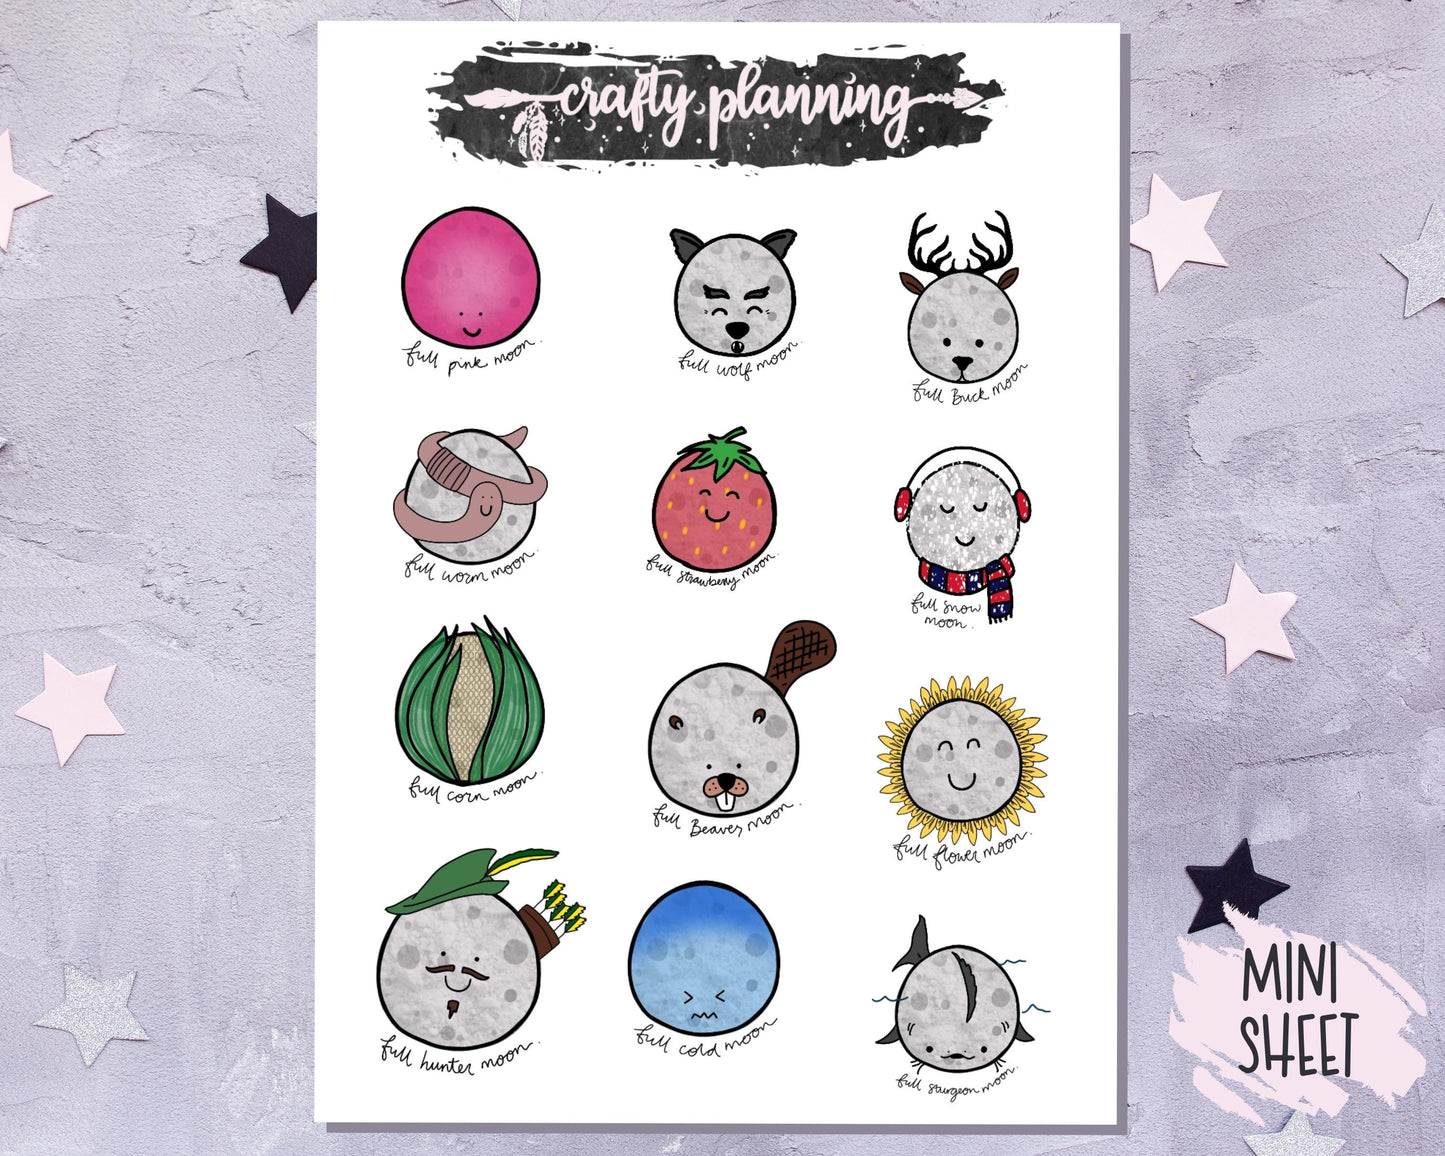 Moon Stickers, Witchcraft Stickers, Moon Phase Stickers, Pagan Stickers, Hand Drawn Stickers, Book Of Shadows, Moon Names, Planner Stickers